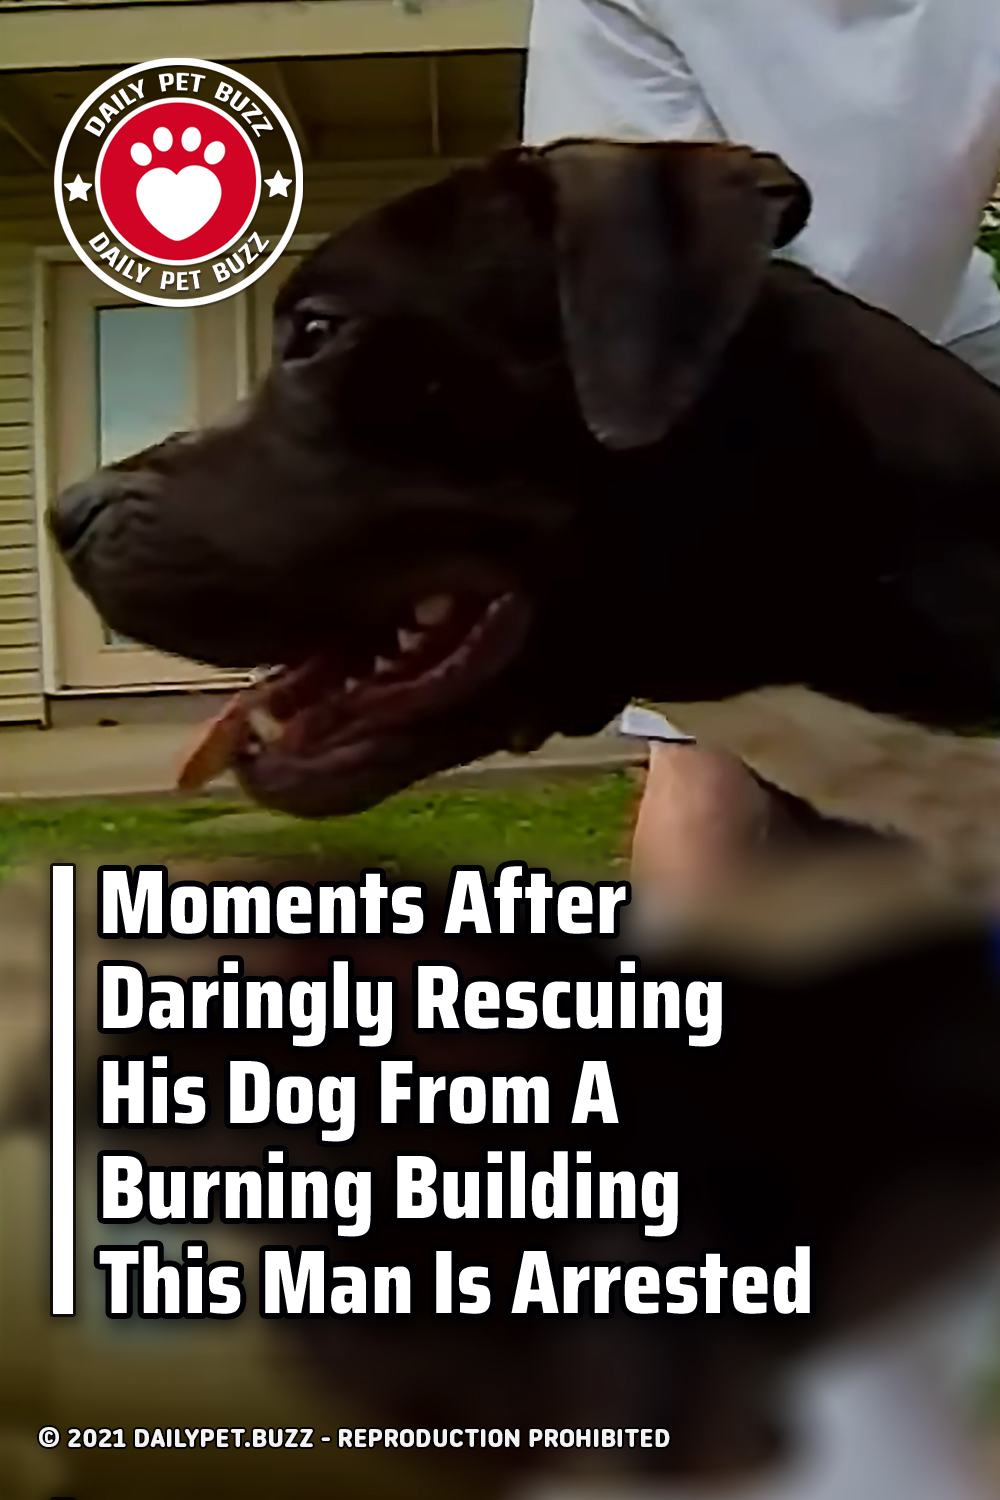 Moments After Daringly Rescuing His Dog From A Burning Building This Man Is Arrested